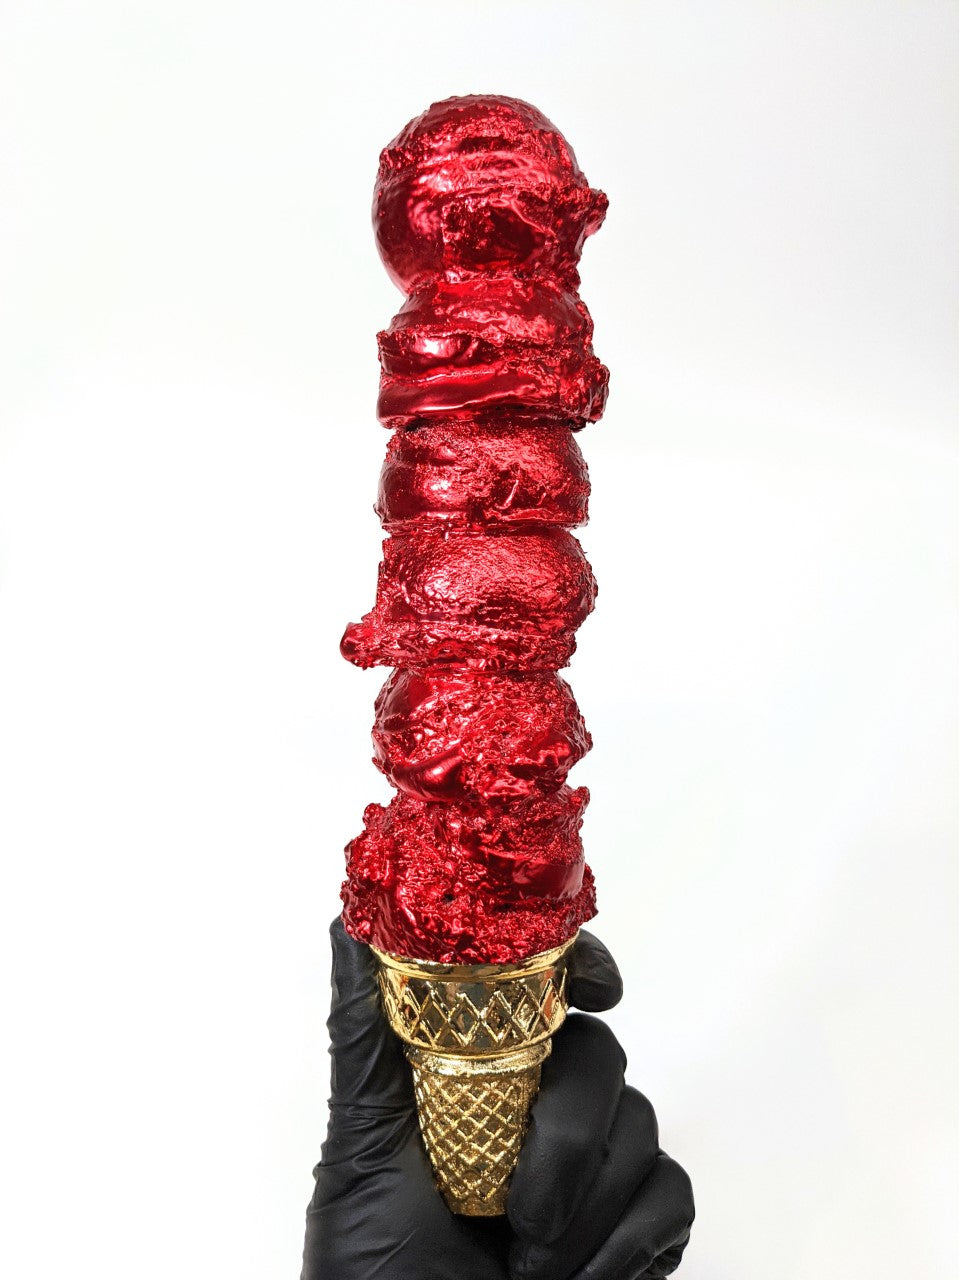 Jourdan Joly- Six Scoop Stack Chrome Cone, Red, 2021